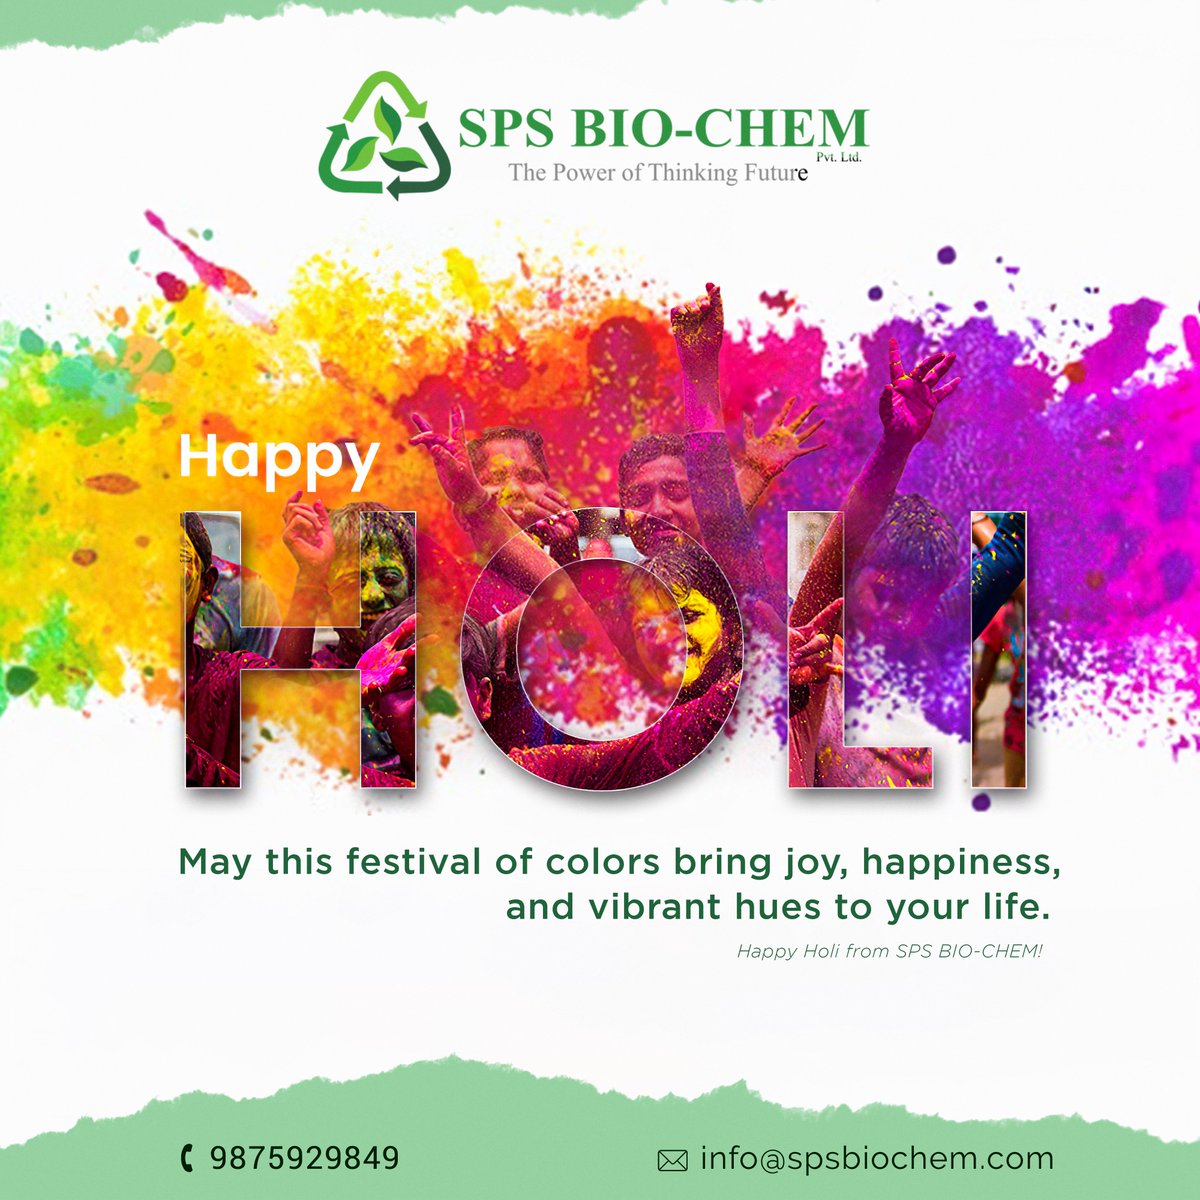 Celebrate with natural colors, conserve water, and keep the festivities safe for all. SPS BIO-CHEM is committed to promoting a greener world and wishes you all a happy and responsible Holi! #happyholi #holi2023 #HolikaDahan2023 #holifestivalofcolours #spsbiochem #rohitsingla